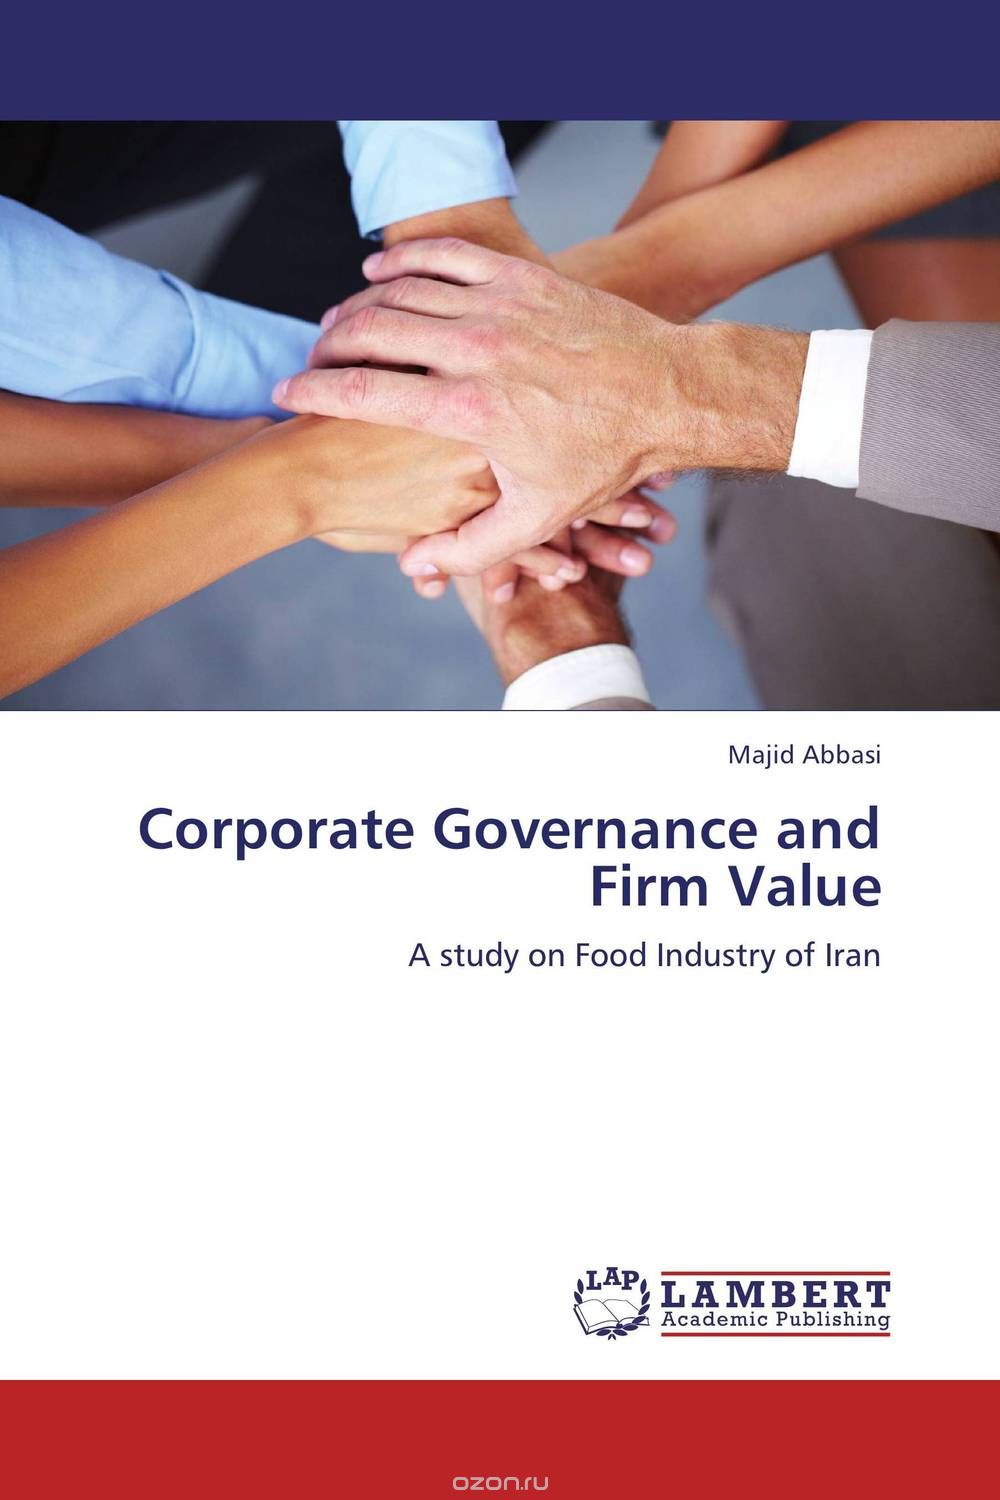 Corporate Governance and Firm Value